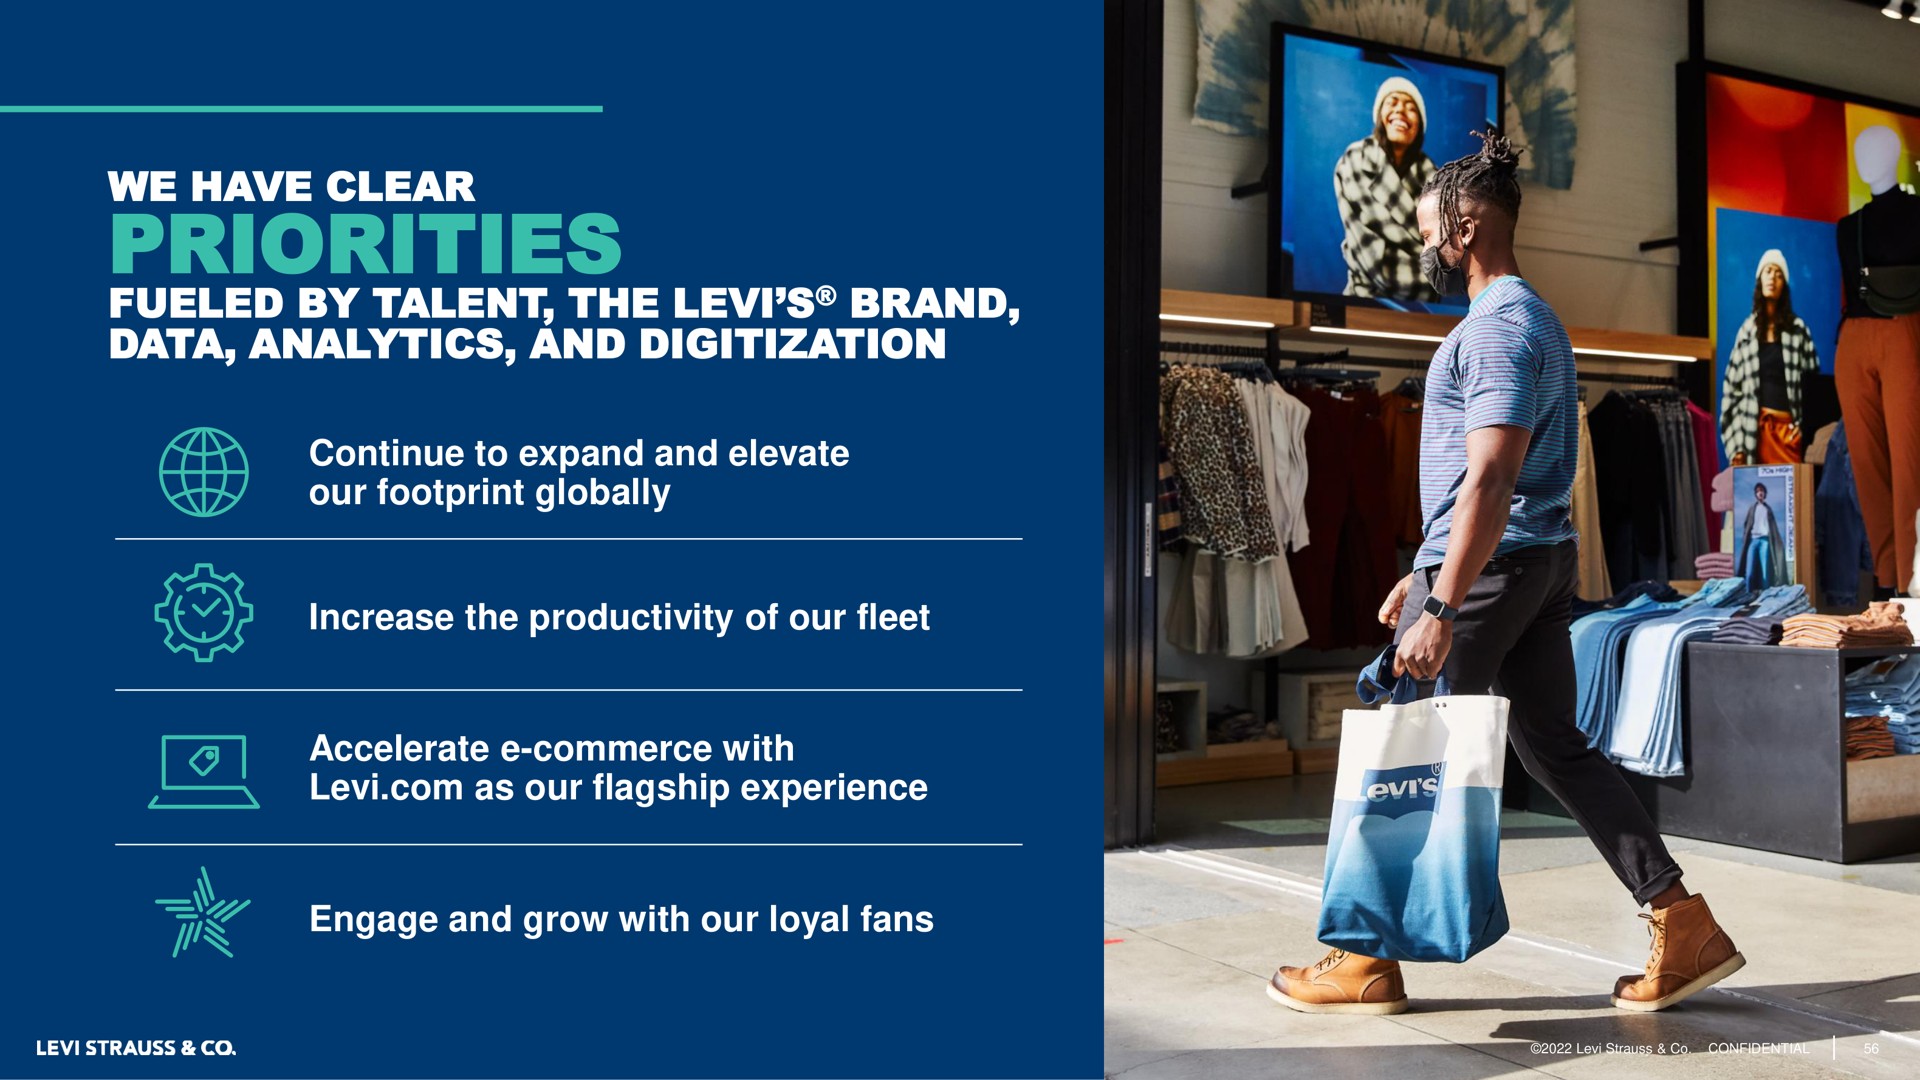 we have clear priorities fueled by talent the brand data analytics and continue to expand elevate our footprint globally increase productivity of our fleet accelerate commerce with as our flagship experience engage grow with our loyal fans | Levi Strauss